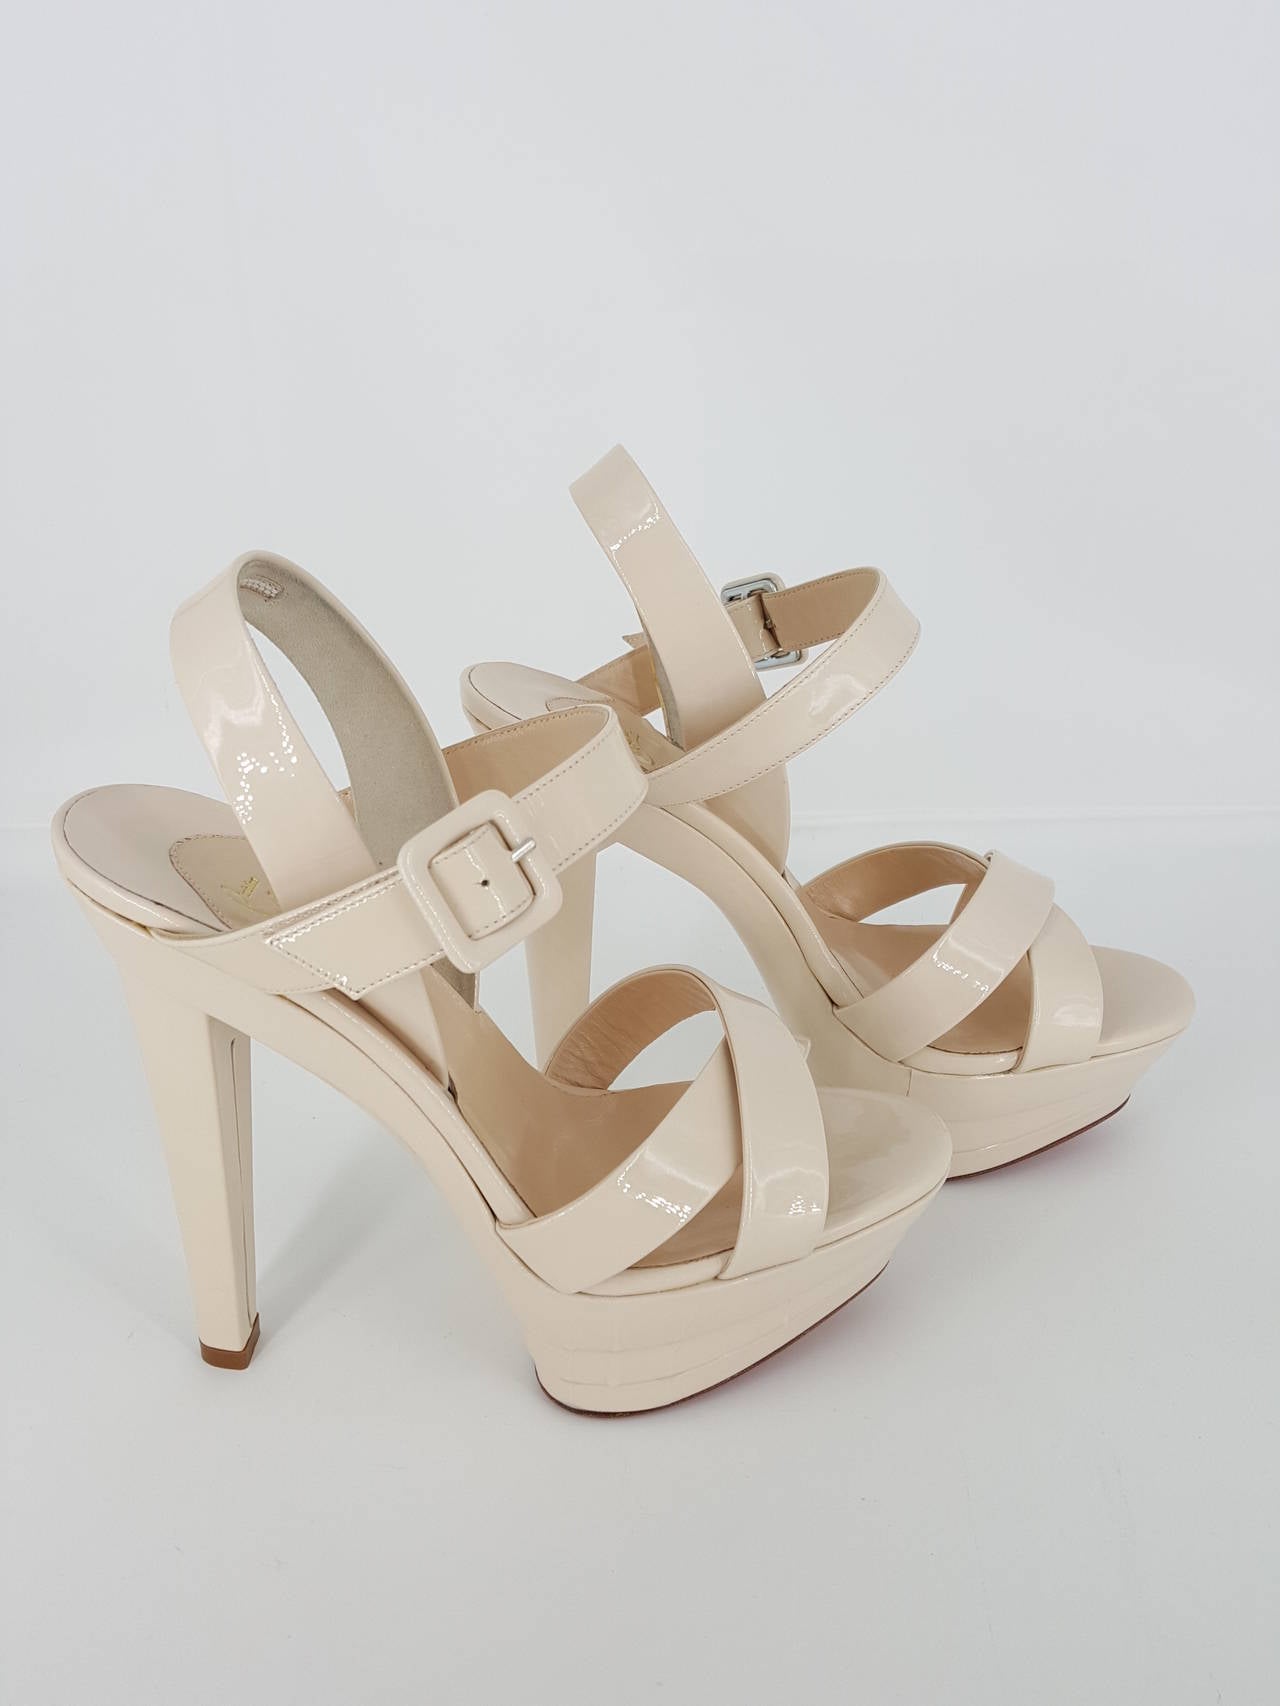 Offered for sale are these lovely Christian Louboutin bone patent leather strappy Platform high heels which have never been worn in size 37 or 6 1/2.  These infamous red bottoms have a 